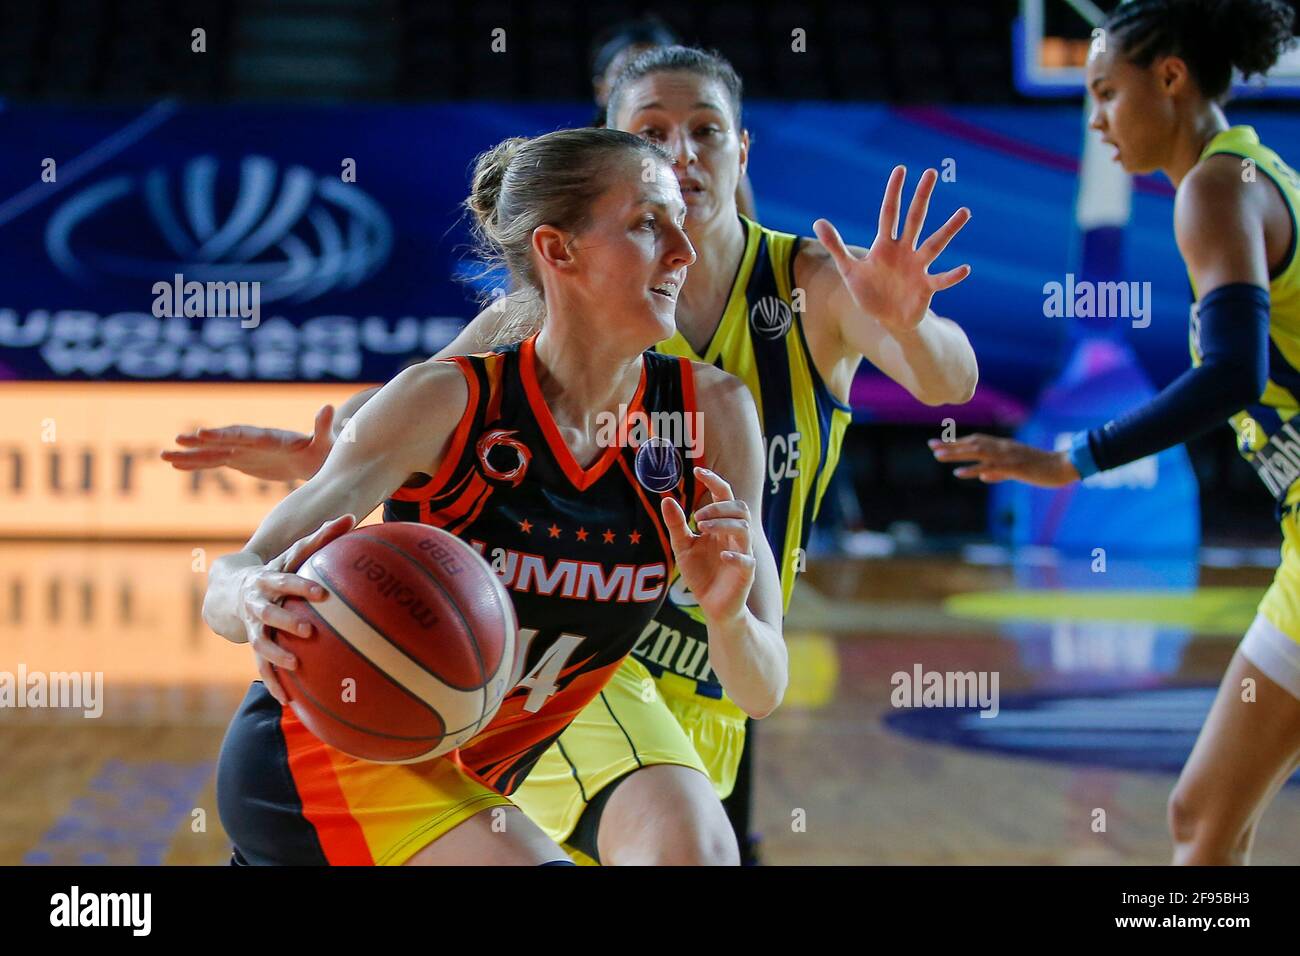 ISTANBUL, Turkey. 16th Apr, 2021: Basketbal: Fenerbahce Oznur Kablo v UMMC Ekaterinburg: Istanboel ISTANBUL, Turkey. 16th Apr, 2021. APRIL 16: Allie Quigley of UMMC Ekaterinburg, Alina Iagupova of Fenerbahce Oznur Kablo during the Euroleague Women Final Four match between Fenerbahce Oznur Kablo and UMMC Ekaterinburg at Volkswagen Arena on April 16, 2021 in Istanbul, Turkey (Photo by /Orange Pictures) Credit: Orange Pics BV/Alamy Live News Stock Photo